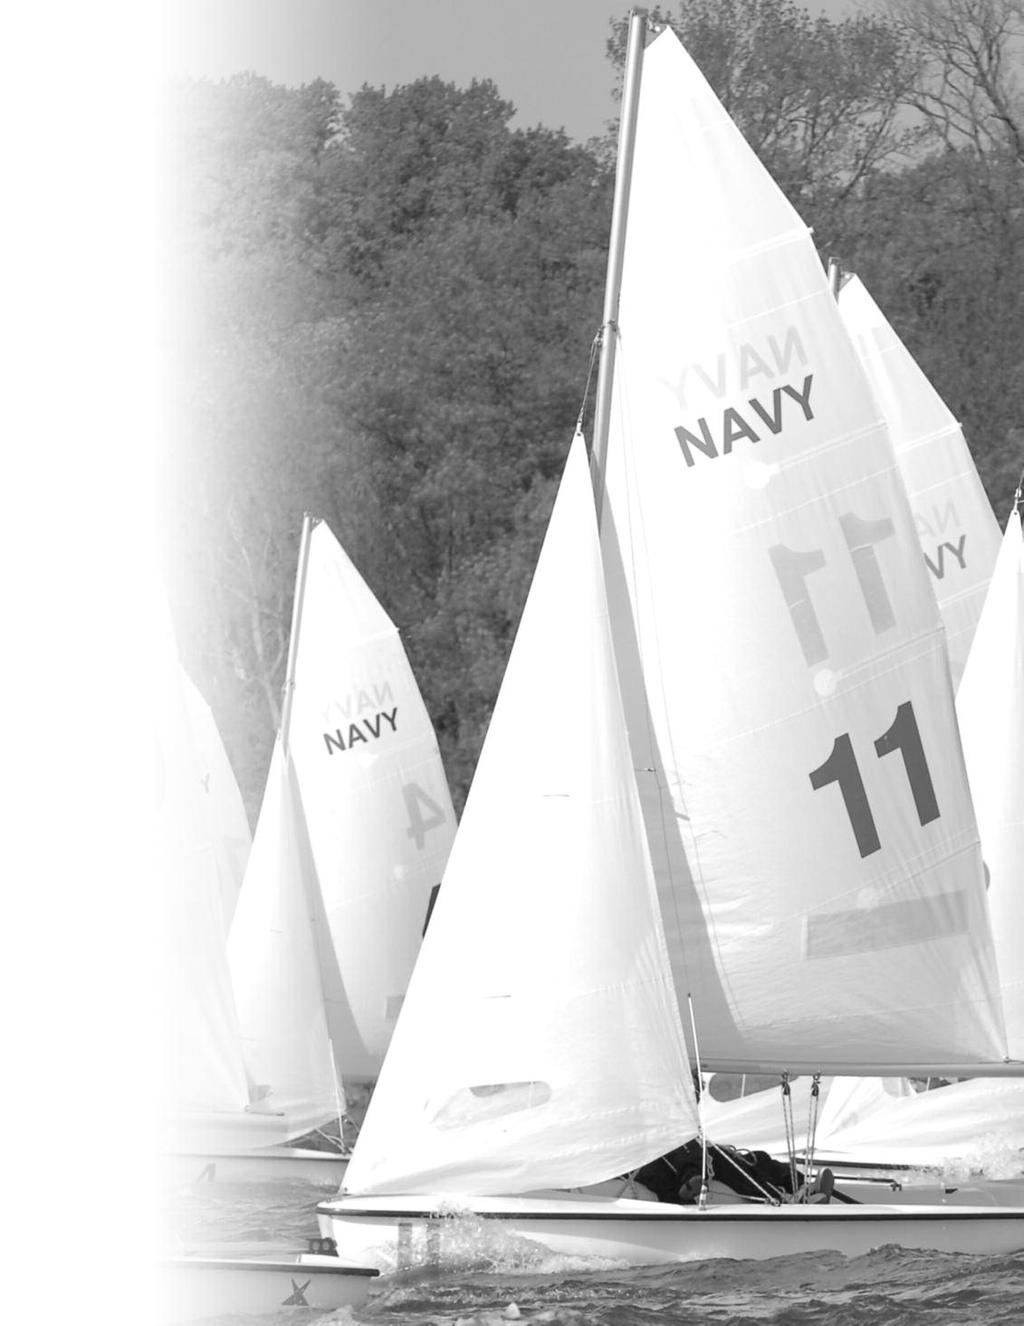 Table of Contents Intercollegiate Sailing Outlook 2 Schedule 3 Coaching Staff 4 Roster 5 Midshipmen Profiles 6-9 Team Facts 9 Sailing Fleet 10 Individual Honors 11 Offshore Sailing Outlook 12